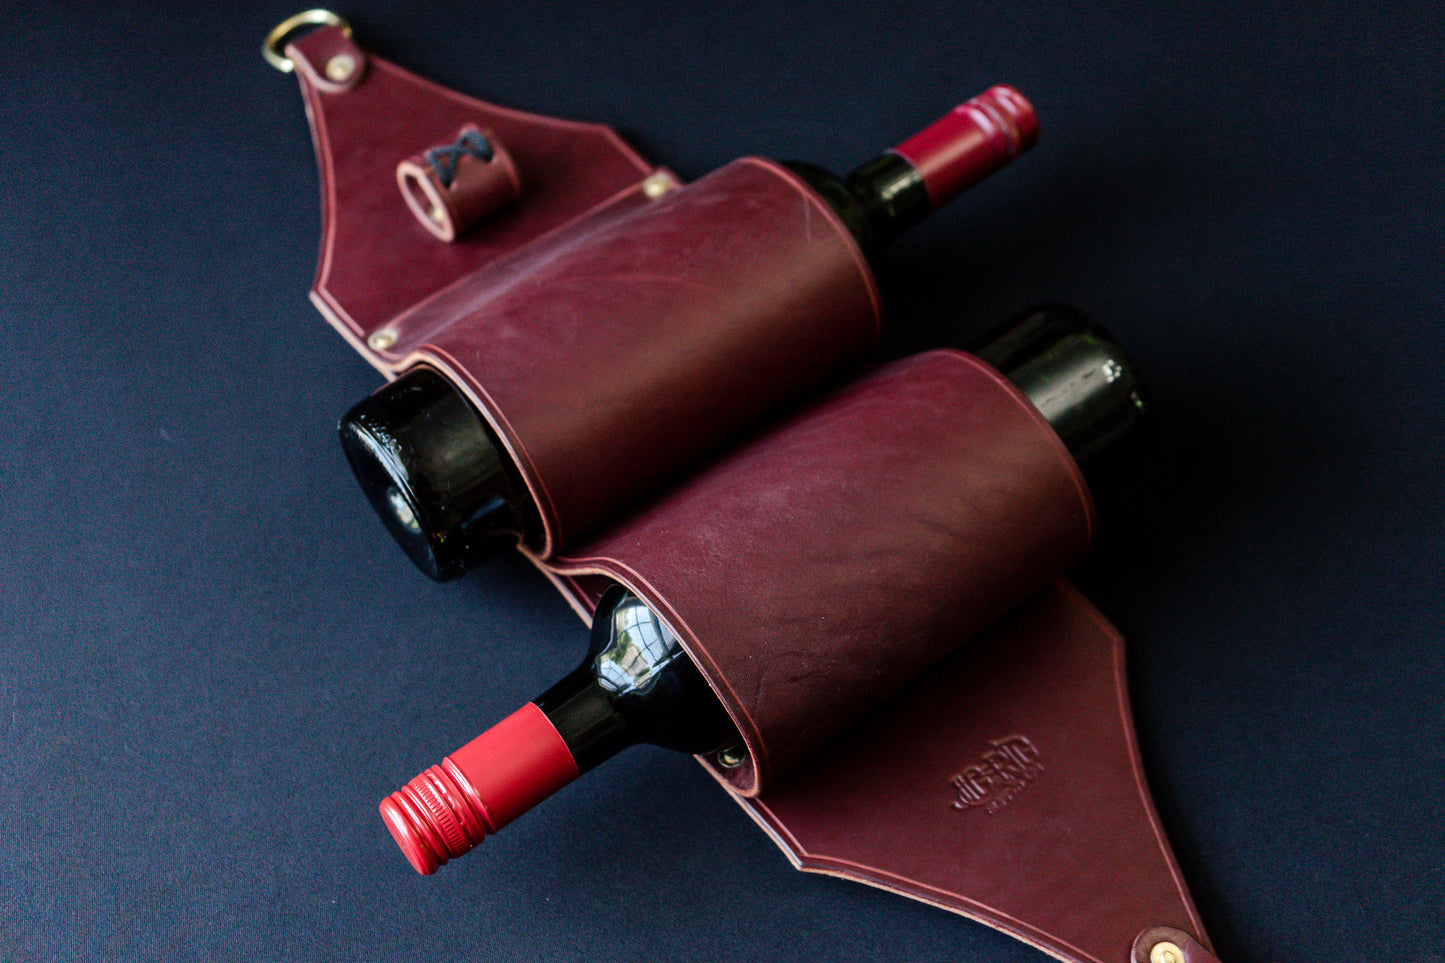 Burgundy leather wine rack with bottles